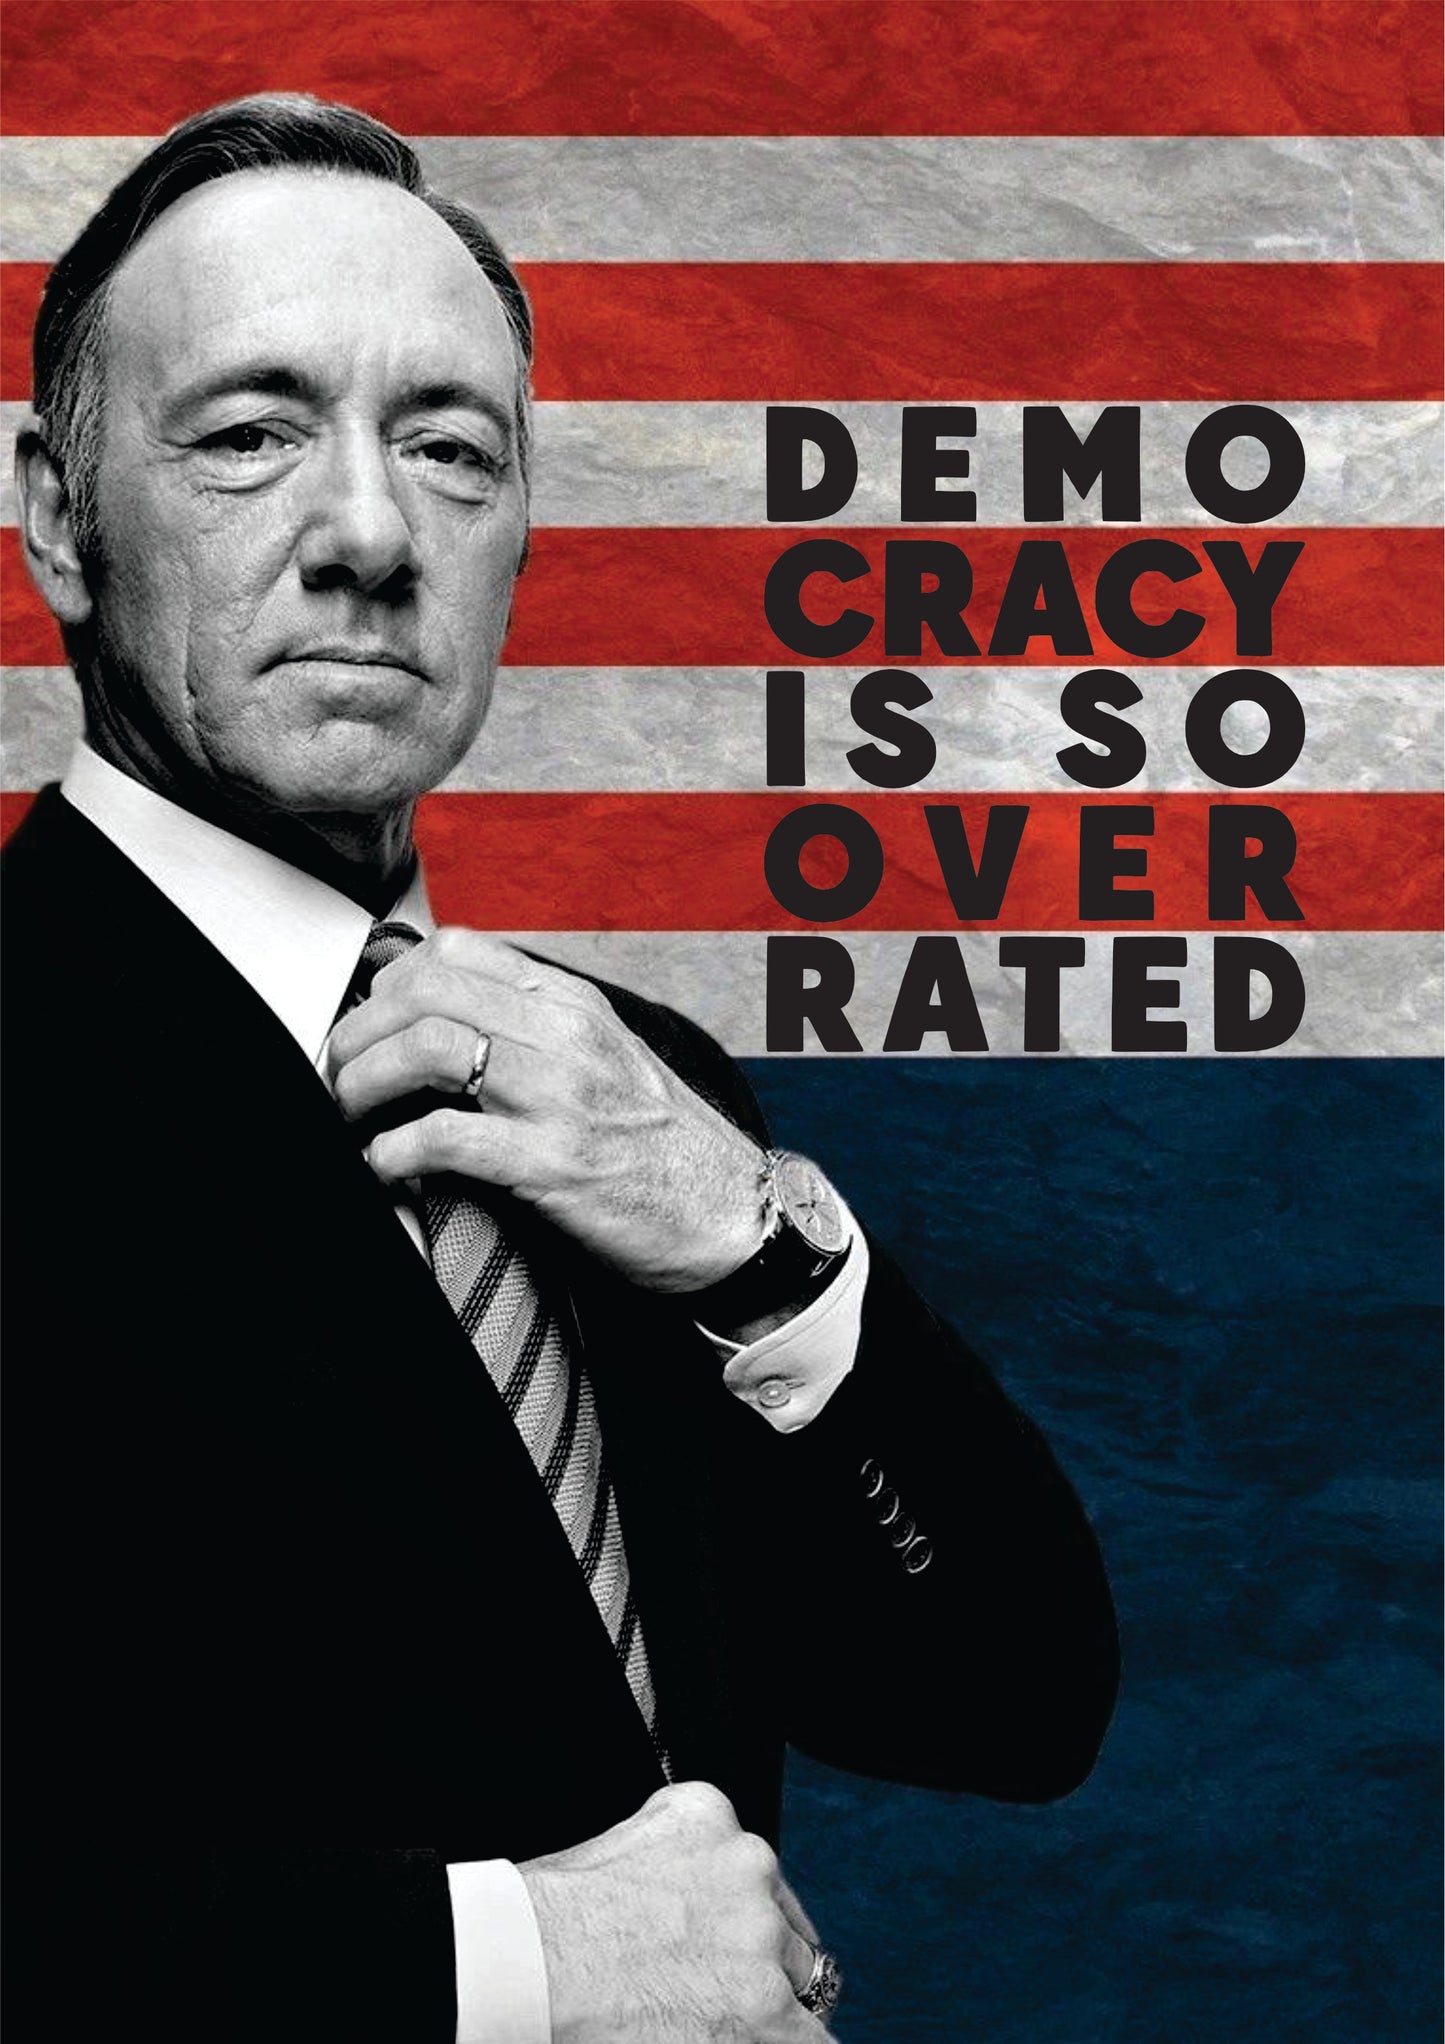 House of Cards - Democracy is so overrated